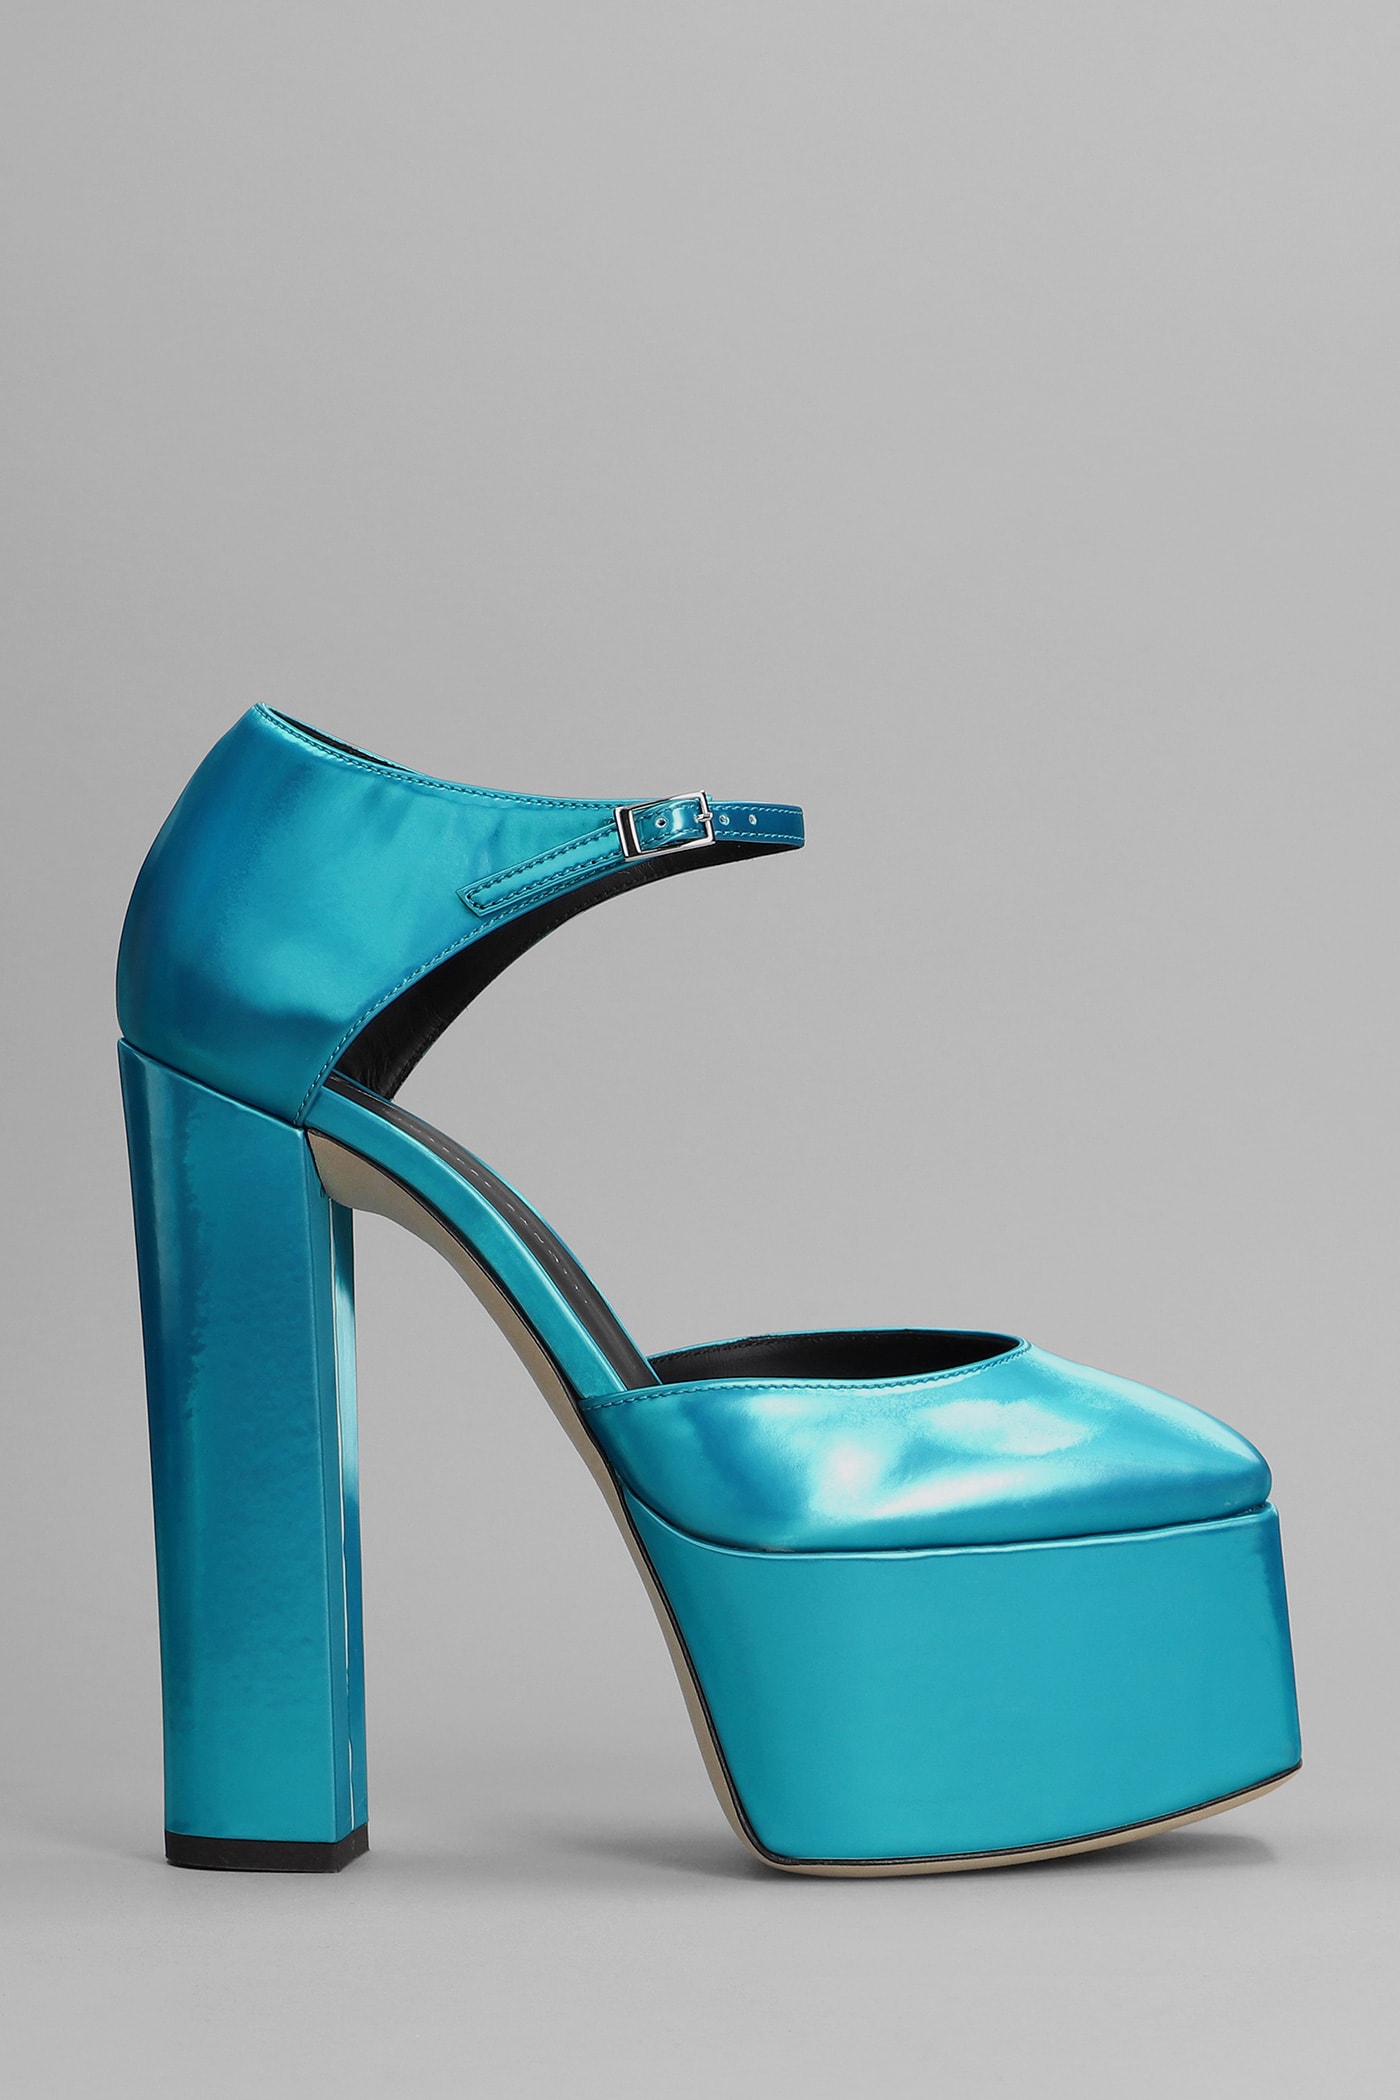 Bebe Sandals In Cyan Leather